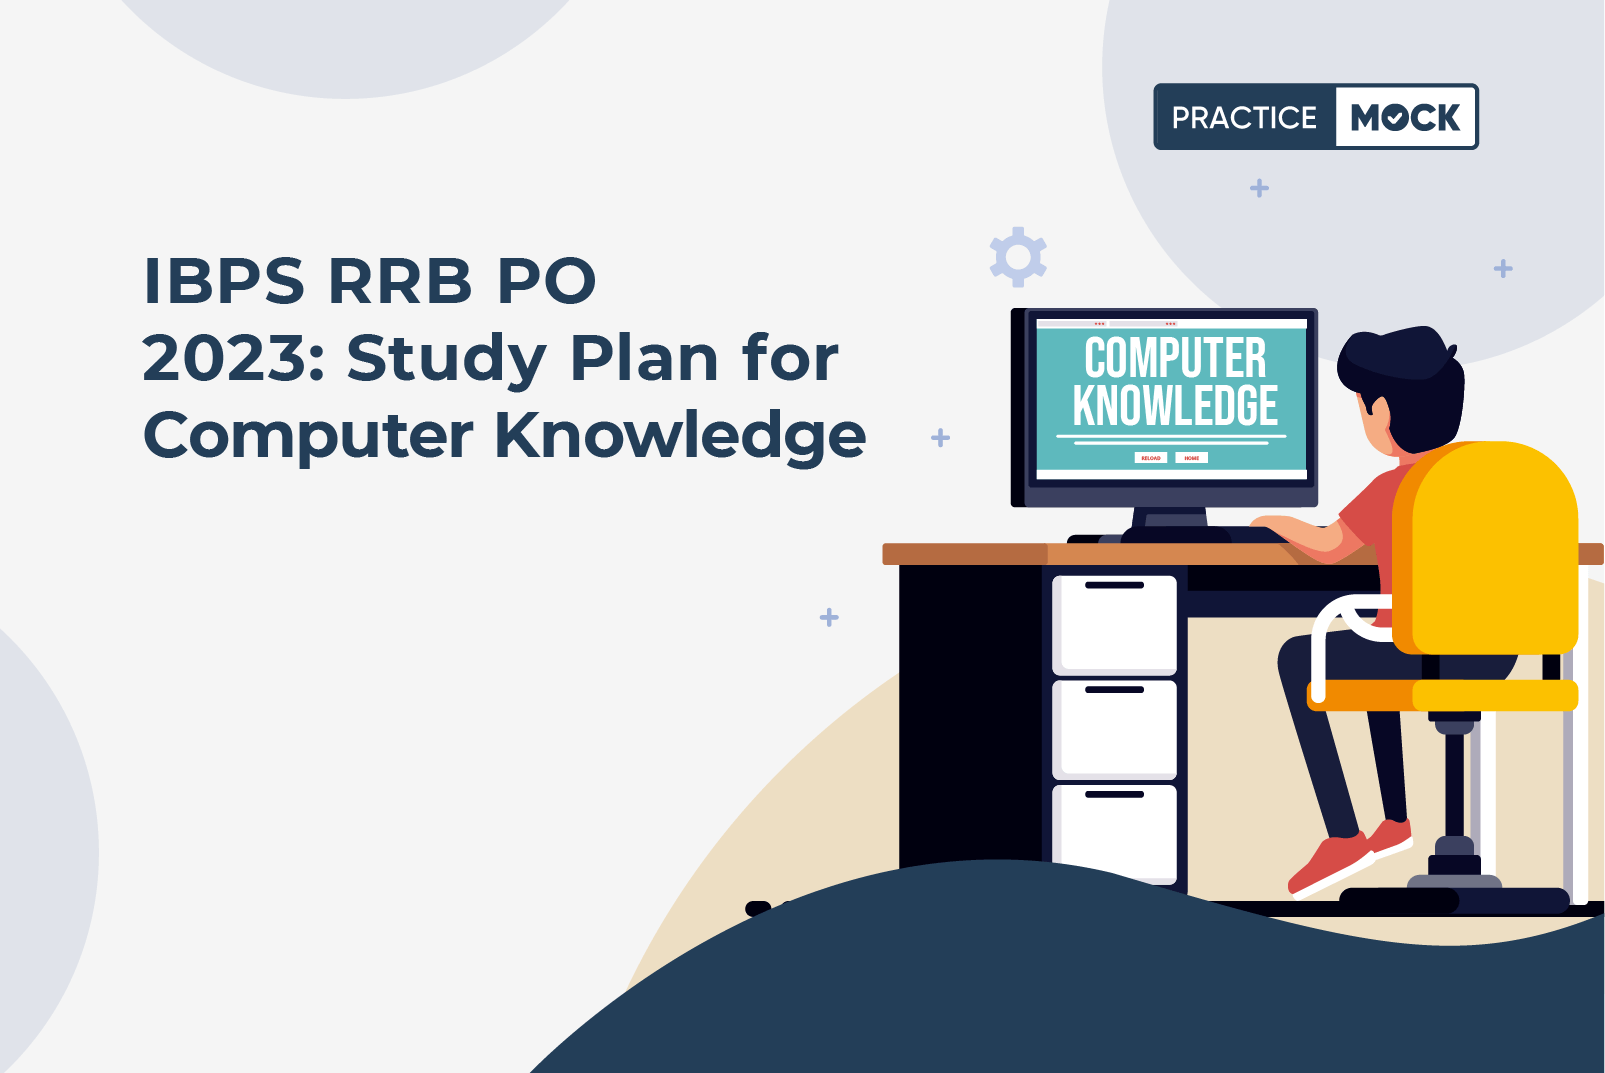 IBPS RRB PO 2023 - Study Plan for Computer Knowledge